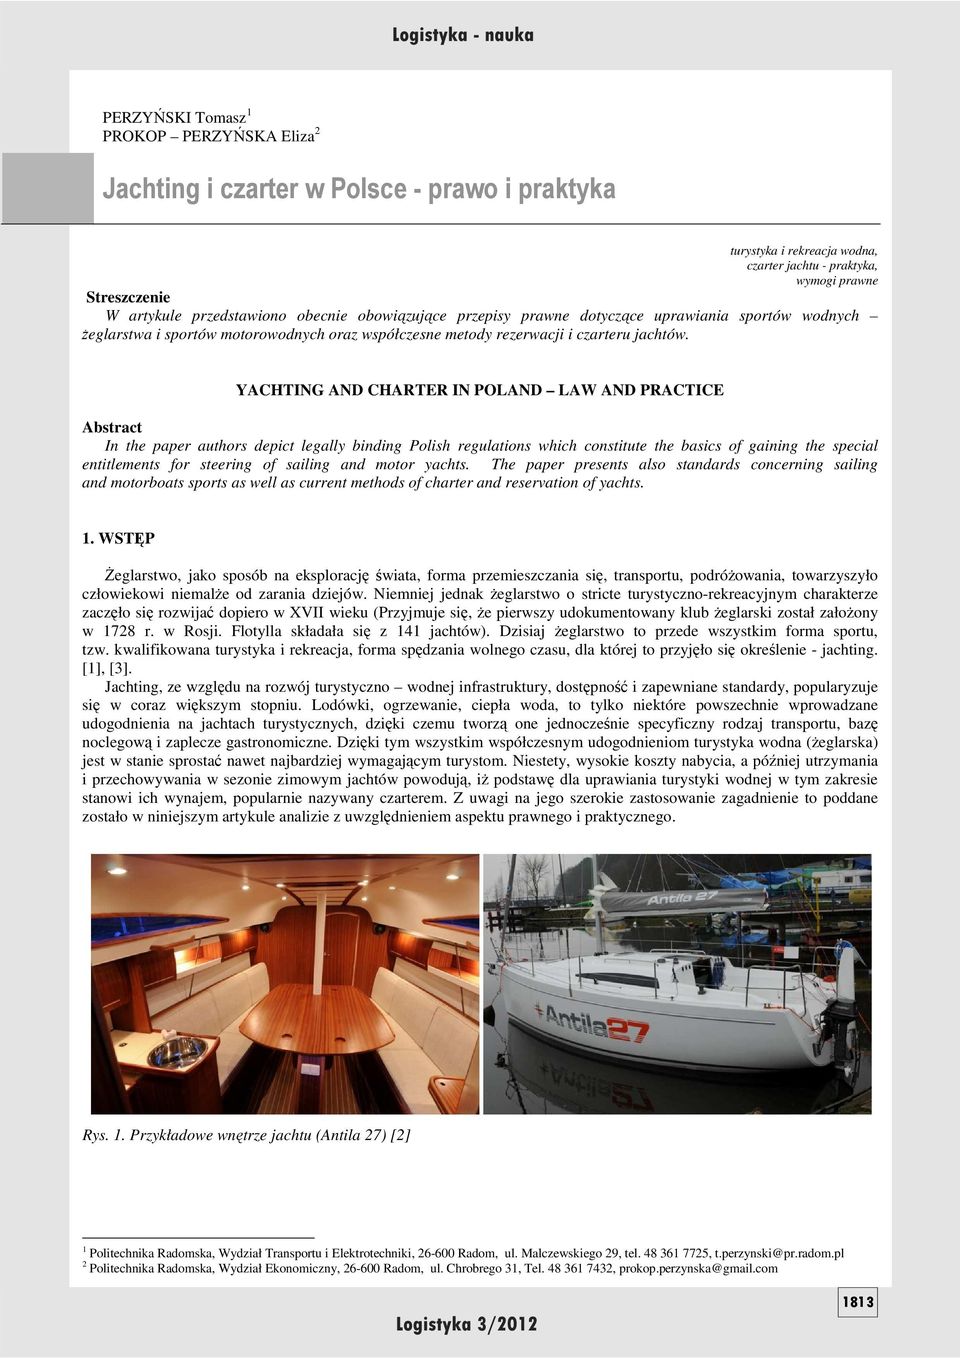 YACHTING AND CHARTER IN POLAND LAW AND PRACTICE Abstract In the paper authors depict legally binding Polish regulations which constitute the basics of gaining the special entitlements for steering of